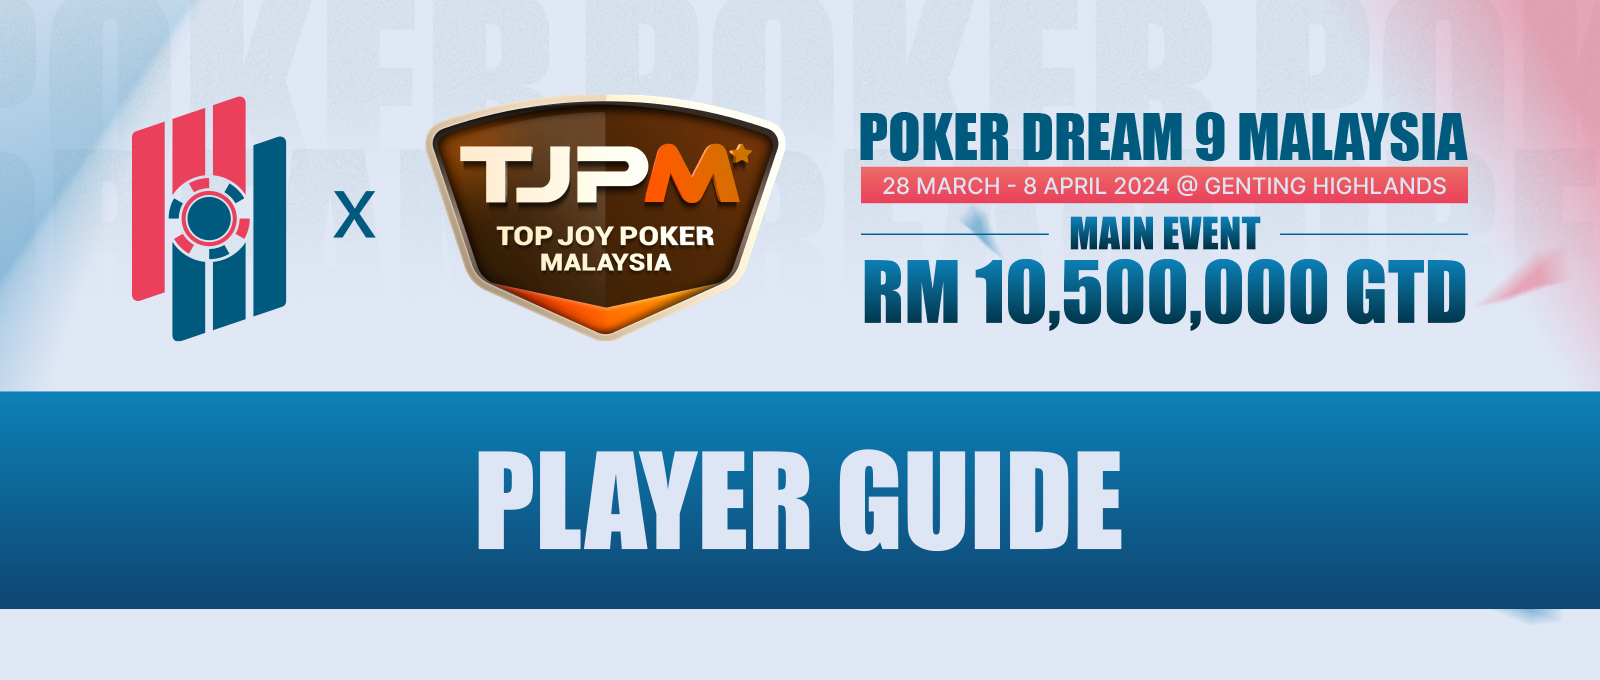 Unleash Your Poker Dreams: The Player Guide of Poker Dream 9 Malaysia